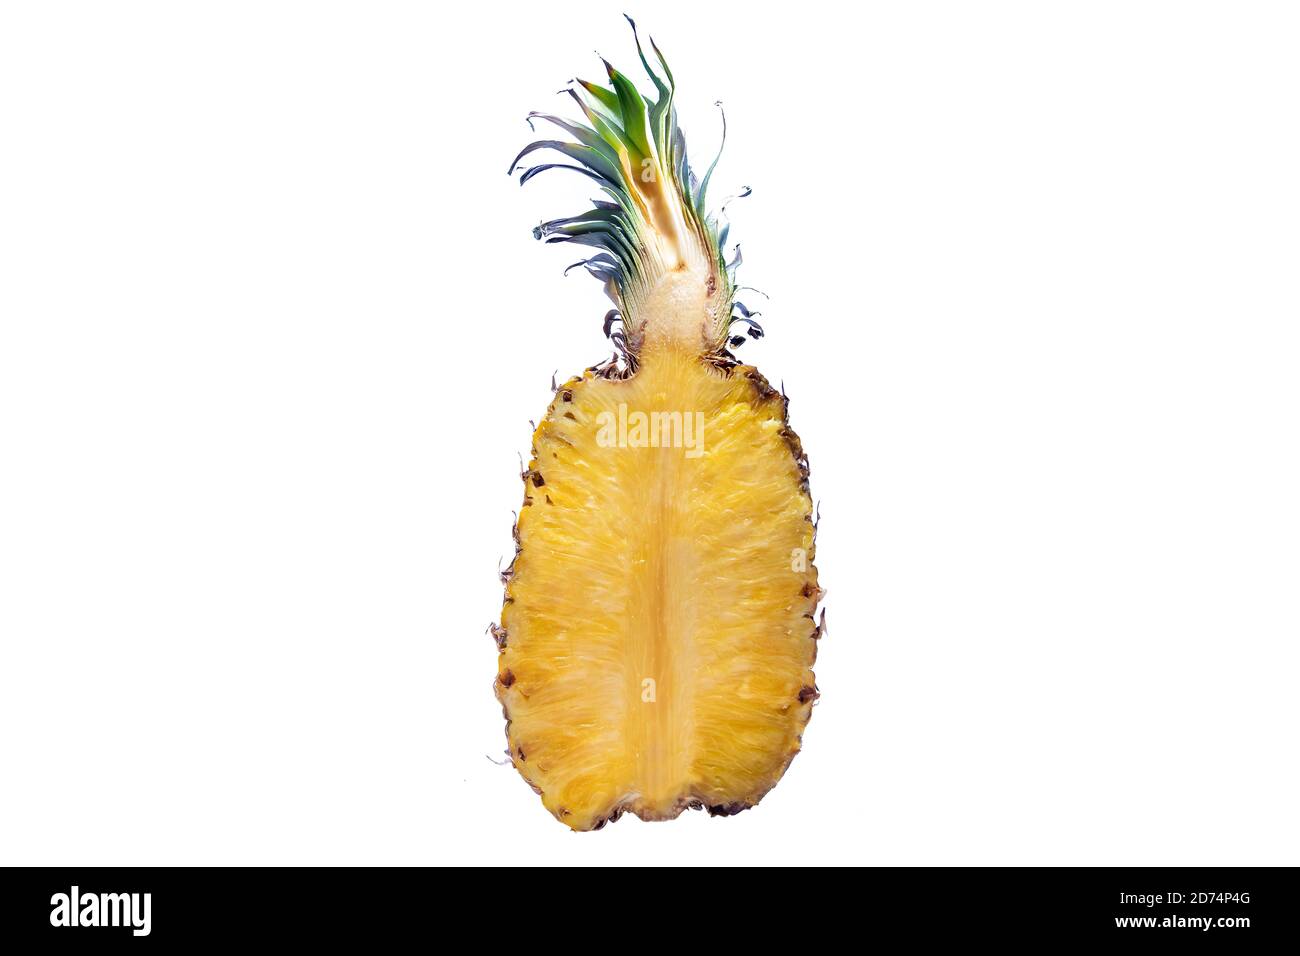 A pineapple cut in half isolated on white background. The (Ananas comosus) is a tropical plant with an edible fruit and the most economically signific Stock Photo